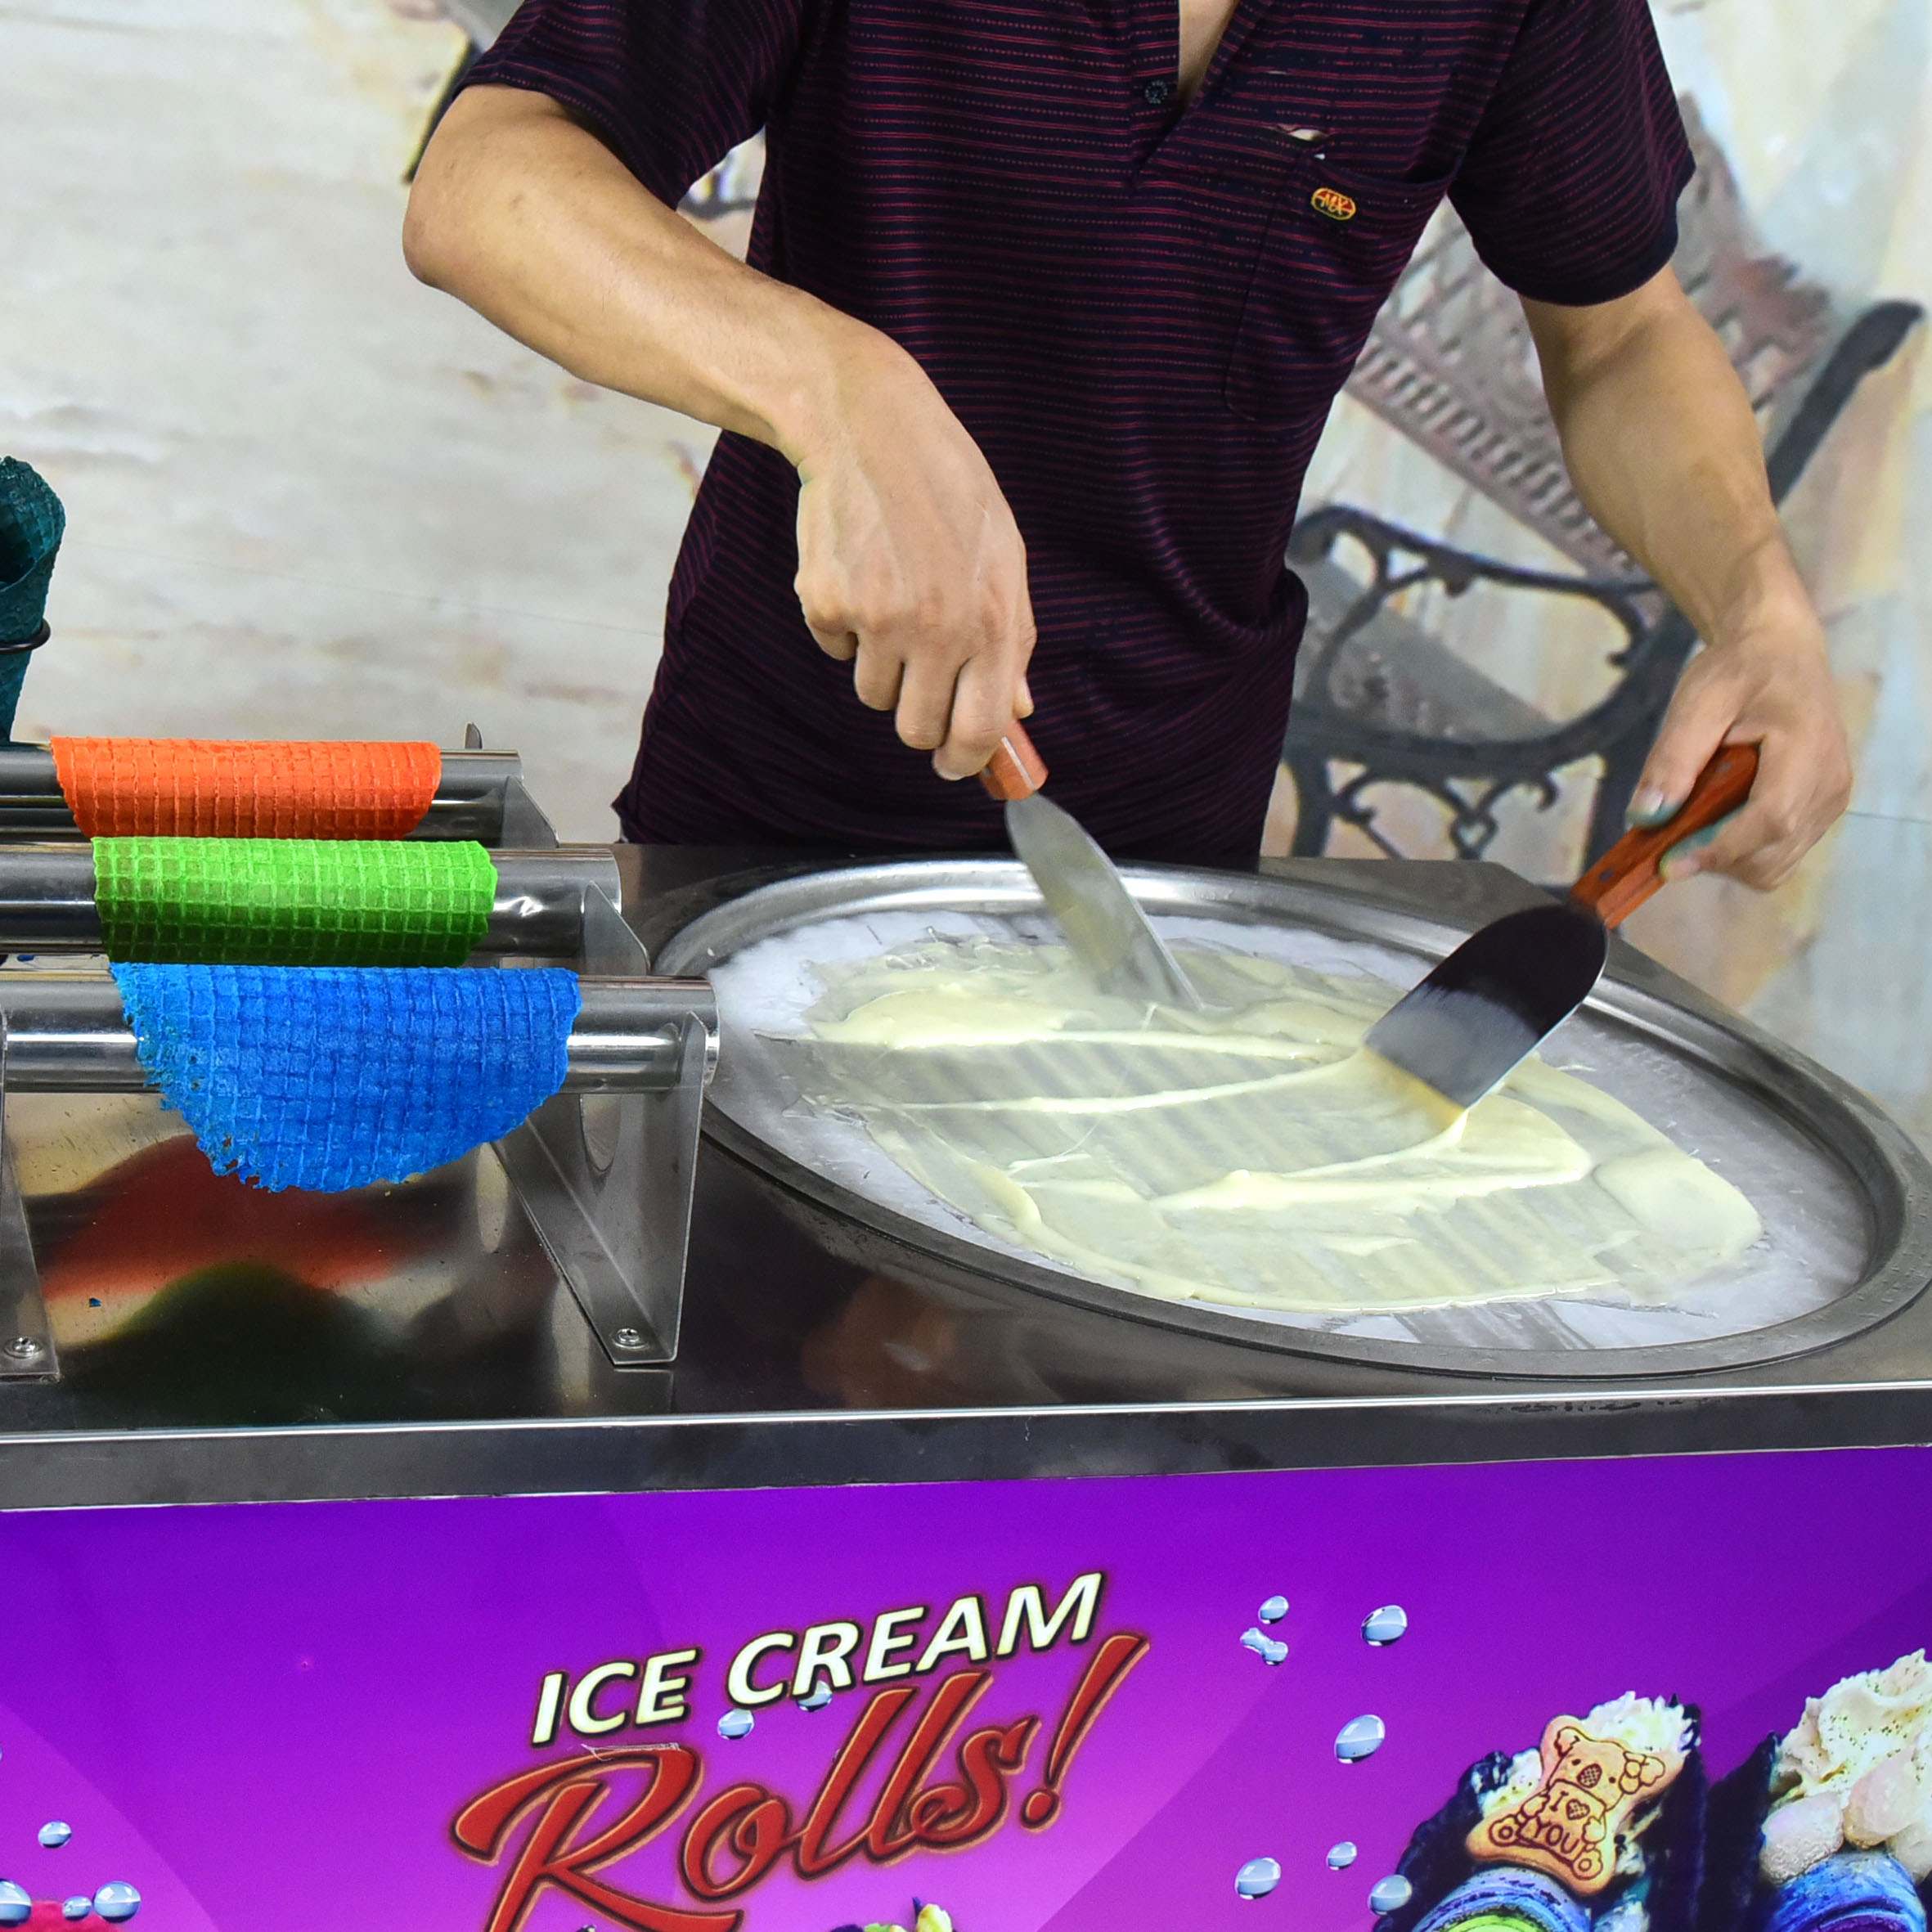 Mexico Taco Commercial Fried Fry Roll Ice Cream Machine/Rolled Ice Cream Machine/Ice Cream Roll Pan Machine with CE Rohs ETL - Fried Ice Cream Machine - 2